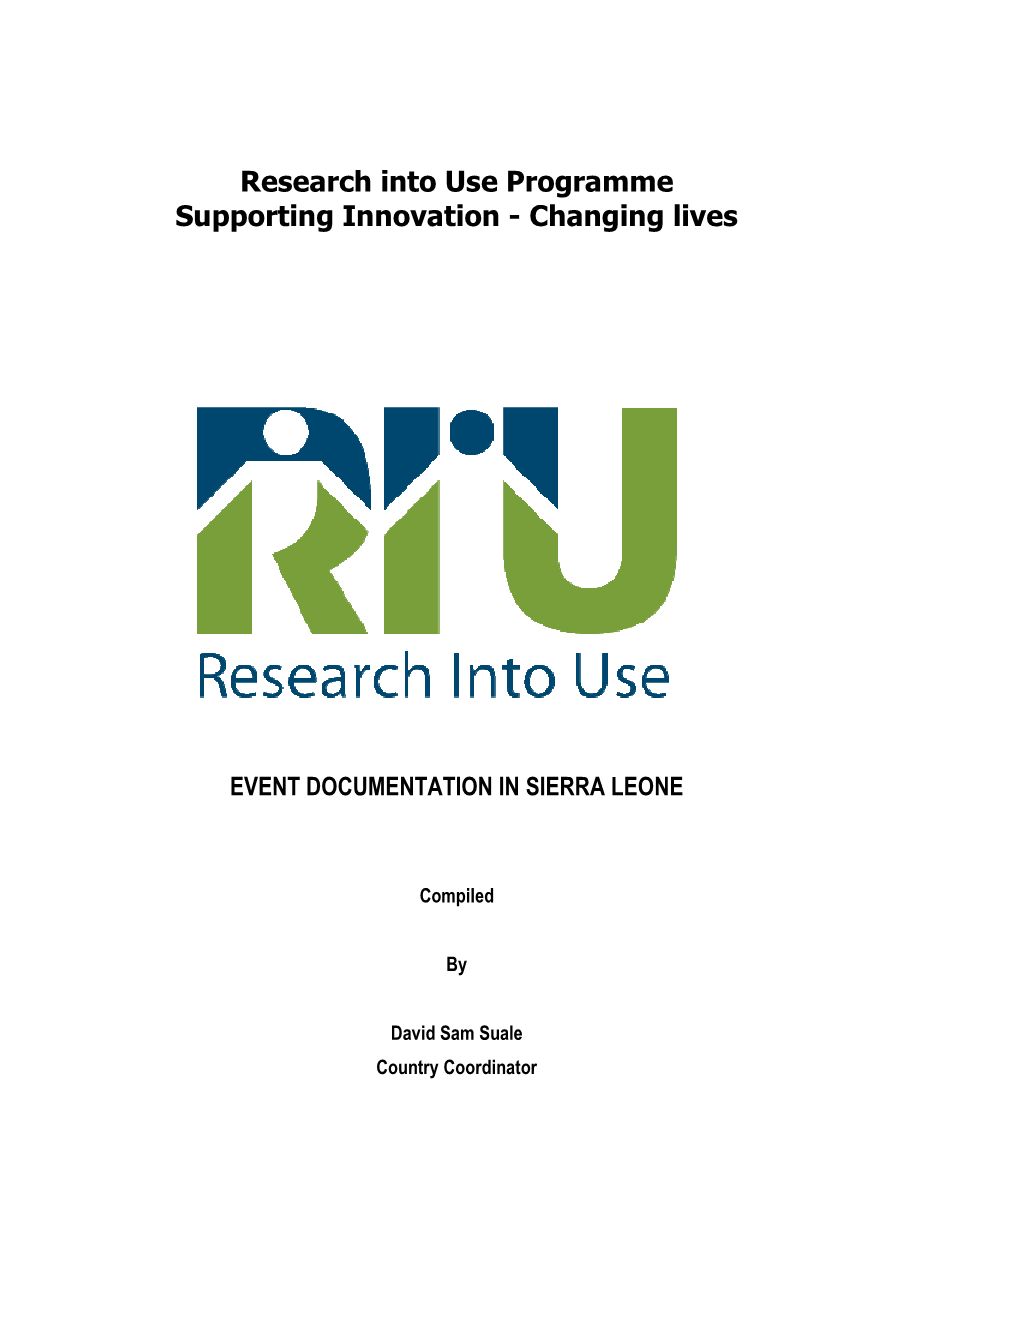 Research Into Use Programme Supporting Innovation - Changing Lives